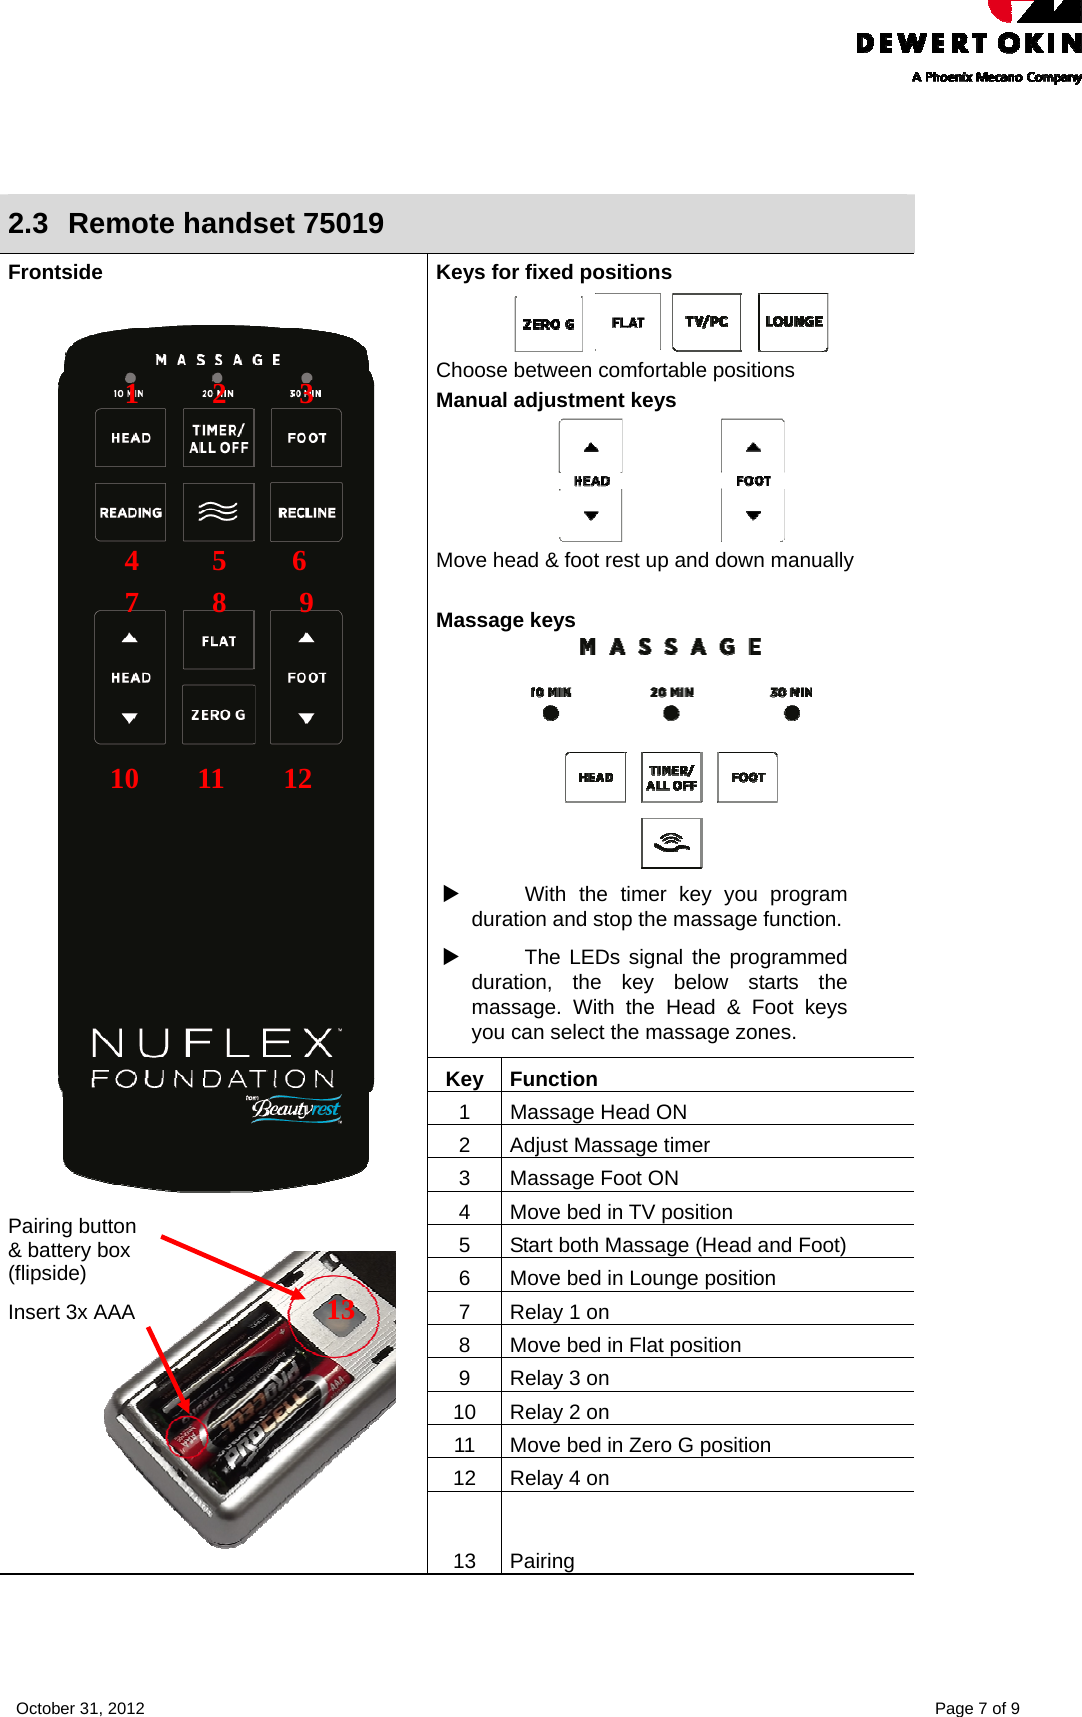    October 31, 2012    Page 7 of 9   2.3 Remote handset 75019 Keys for fixed positions        Choose between comfortable positions Manual adjustment keys                    Move head &amp; foot rest up and down manually  Massage keys    X  With the timer key you program duration and stop the massage function. X  The LEDs signal the programmed duration, the key below starts the massage. With the Head &amp; Foot keys you can select the massage zones. Key Function 1  Massage Head ON 2  Adjust Massage timer 3  Massage Foot ON 4  Move bed in TV position 5  Start both Massage (Head and Foot) 6  Move bed in Lounge position 7  Relay 1 on 8  Move bed in Flat position 9  Relay 3 on 10  Relay 2 on 11  Move bed in Zero G position 12  Relay 4 on Frontside                    1          2          3                         4          5         6                 7          8          9                 10        11        12             Pairing button  &amp; battery box  (flipside)  Insert 3x AAA                                 13         13 Pairing  